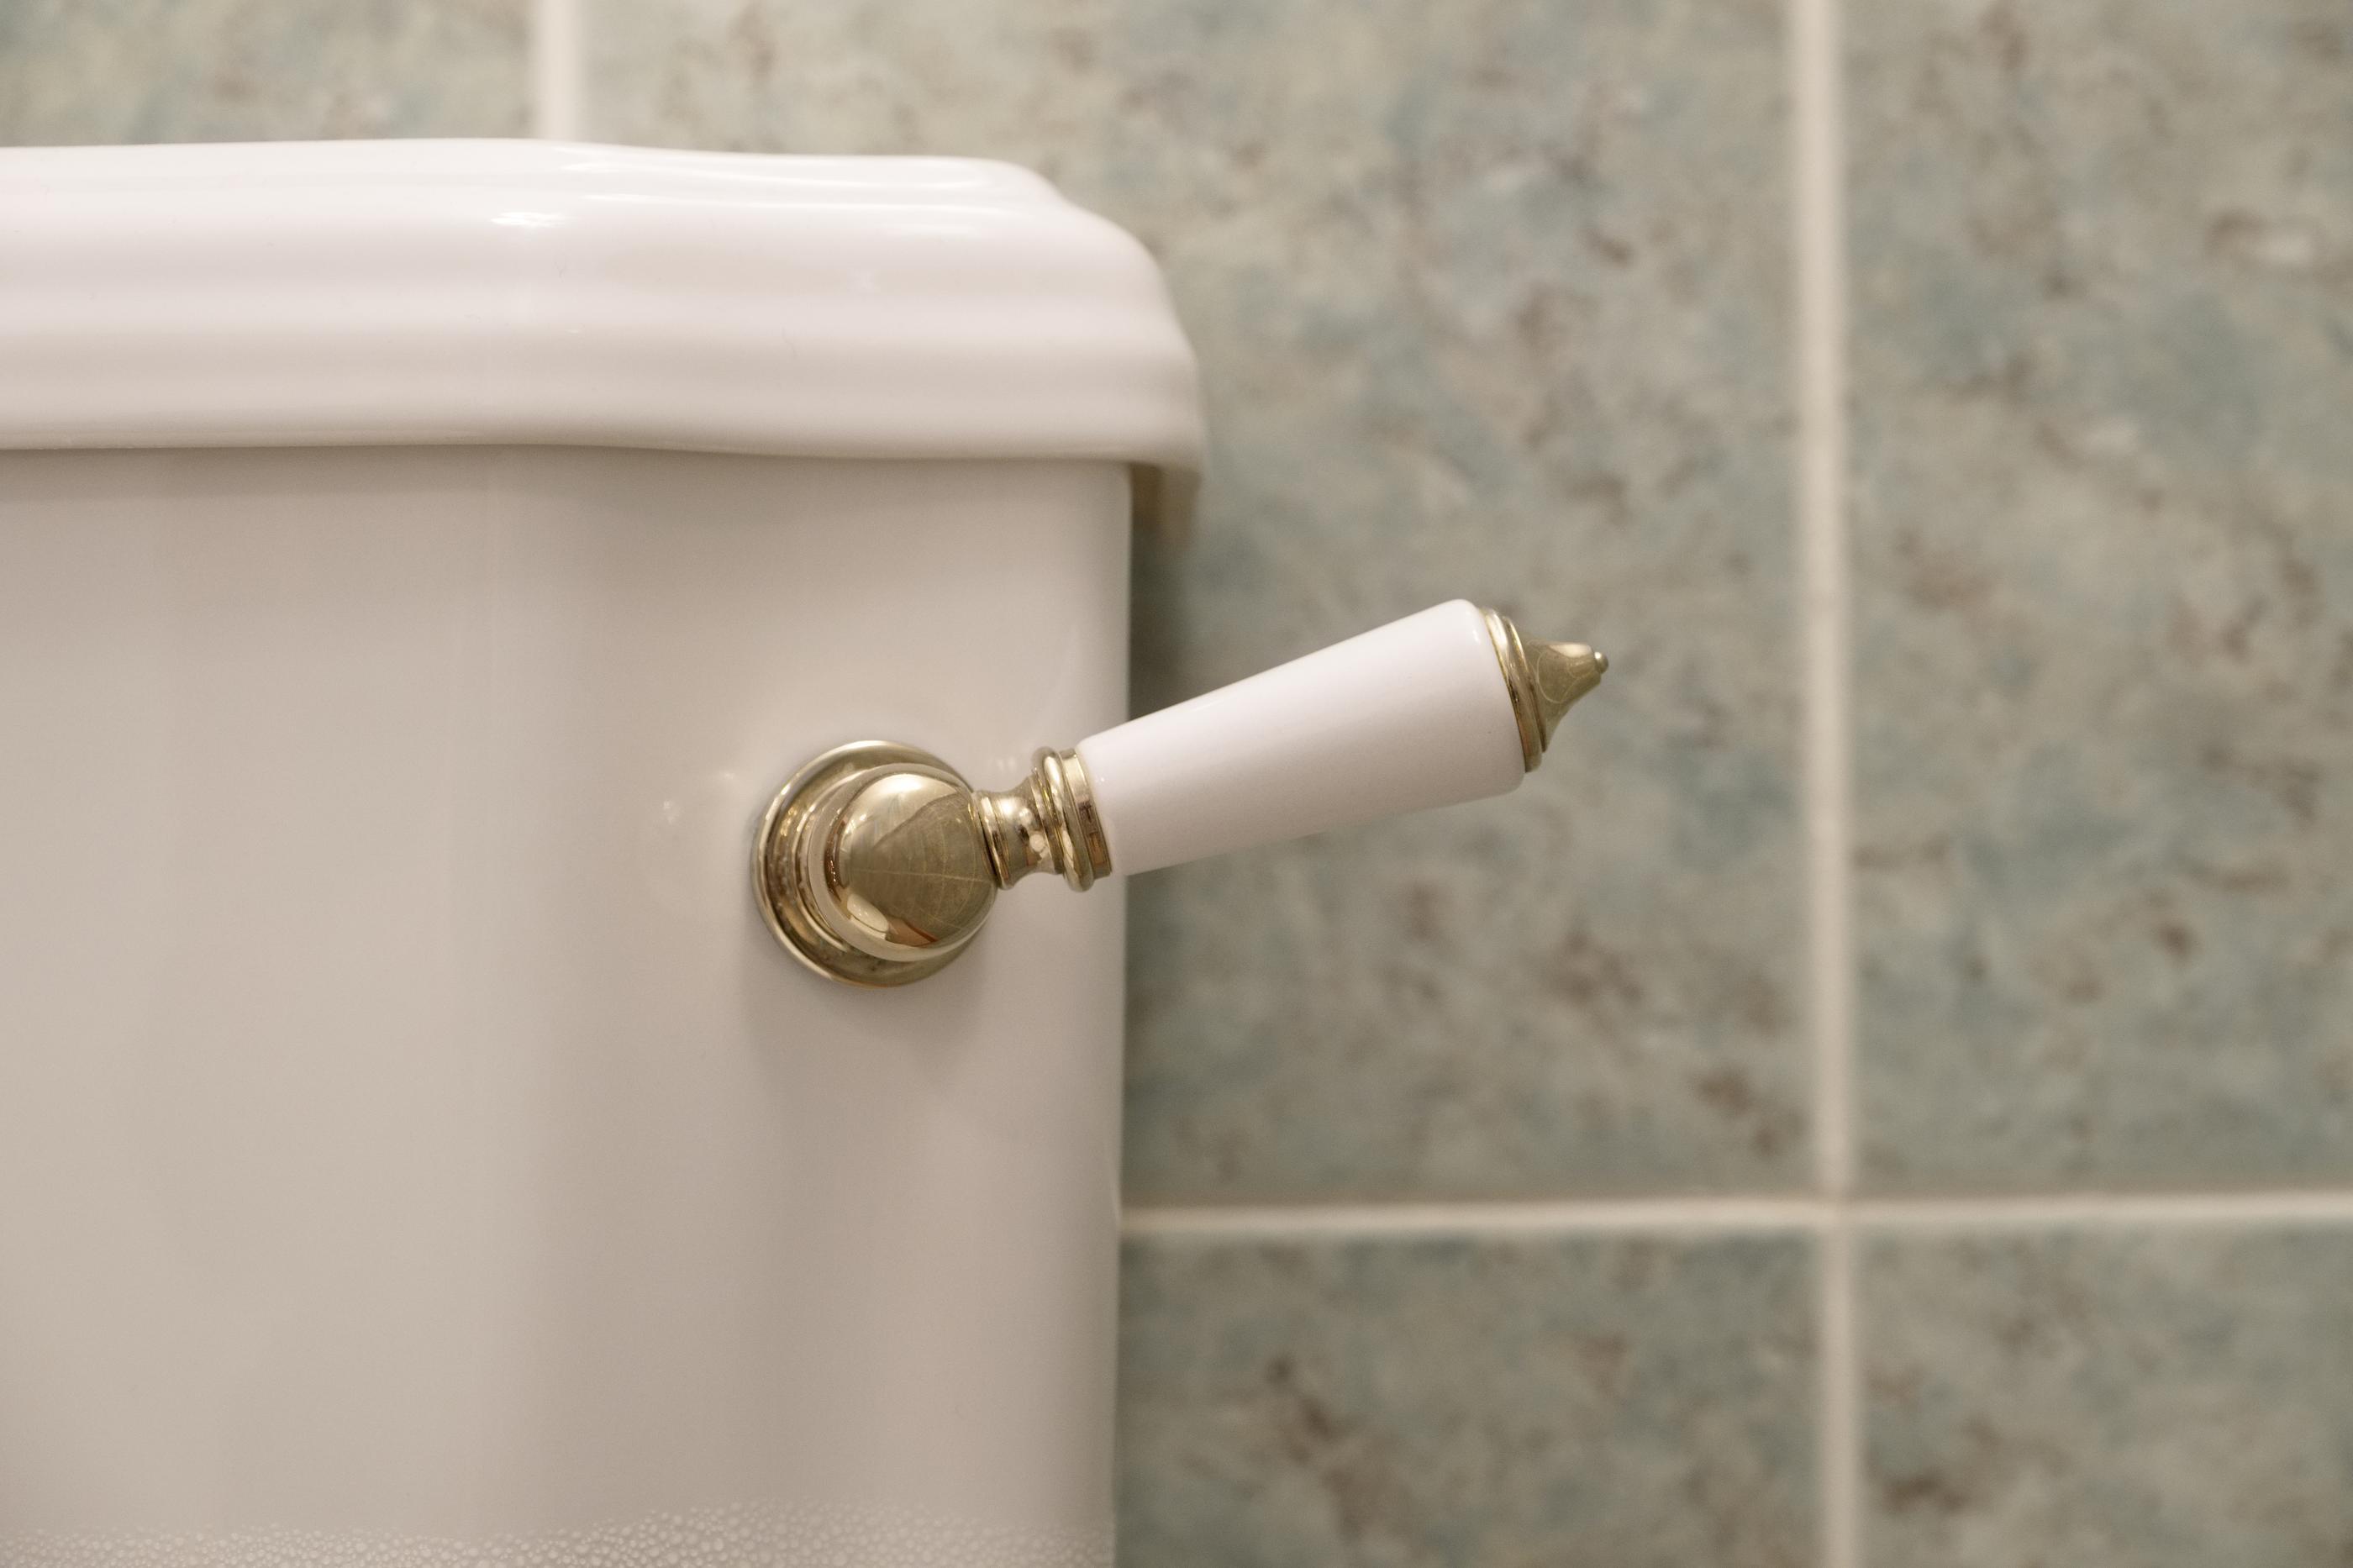 What to Do When Your Toilet is Overflowing